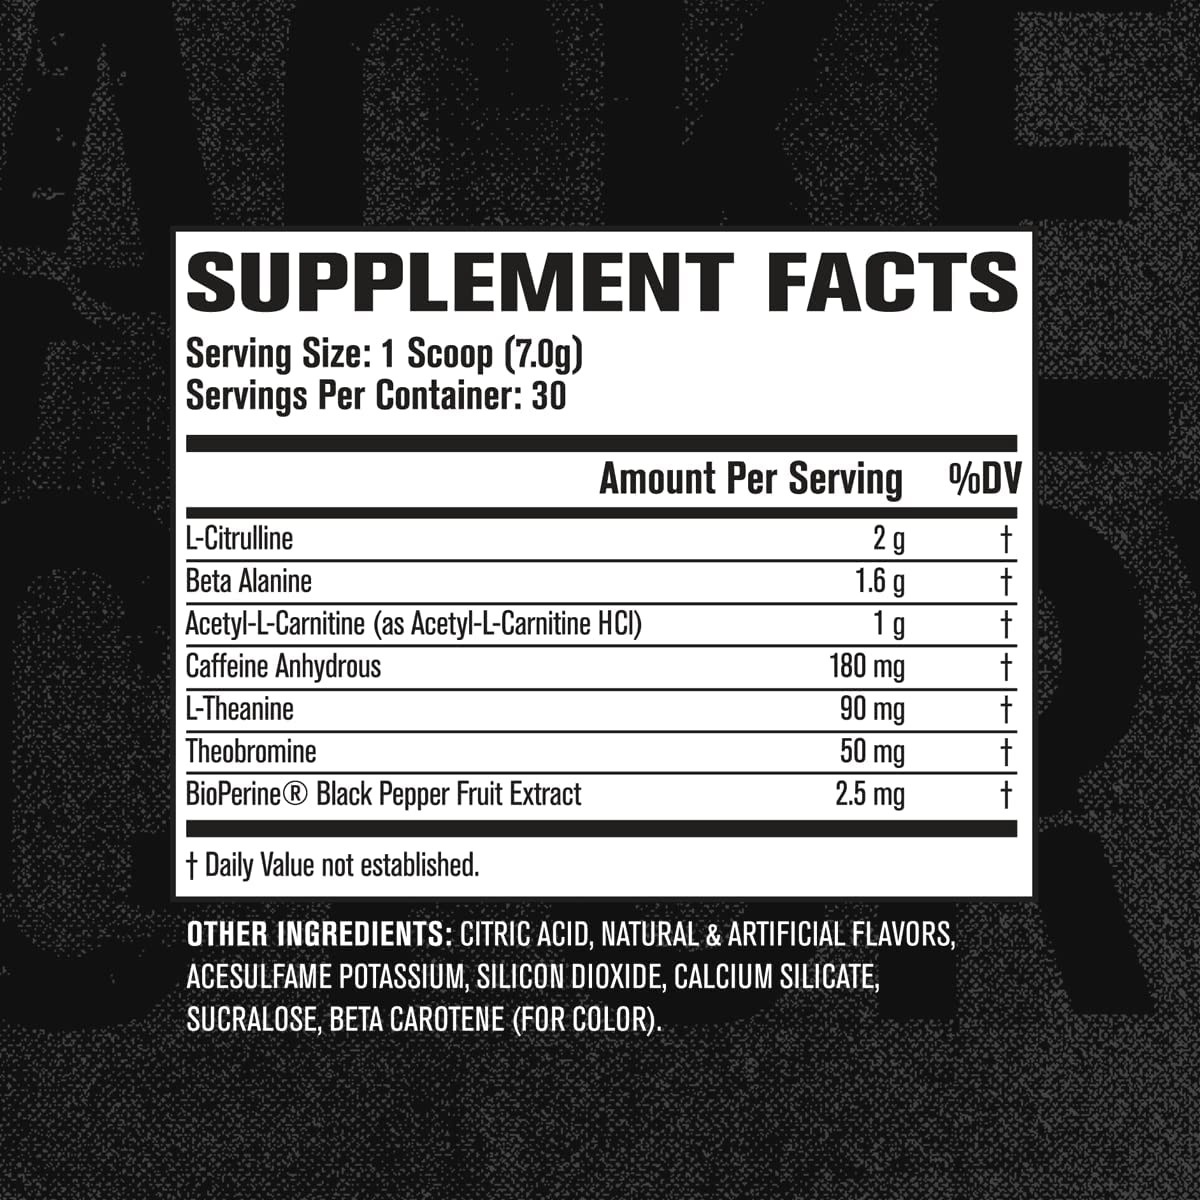 Pre-Workout hỗ trợ giảm mỡ NITRO SURGE SHRED Jacked Factory : Made in USA 30 lần dùng